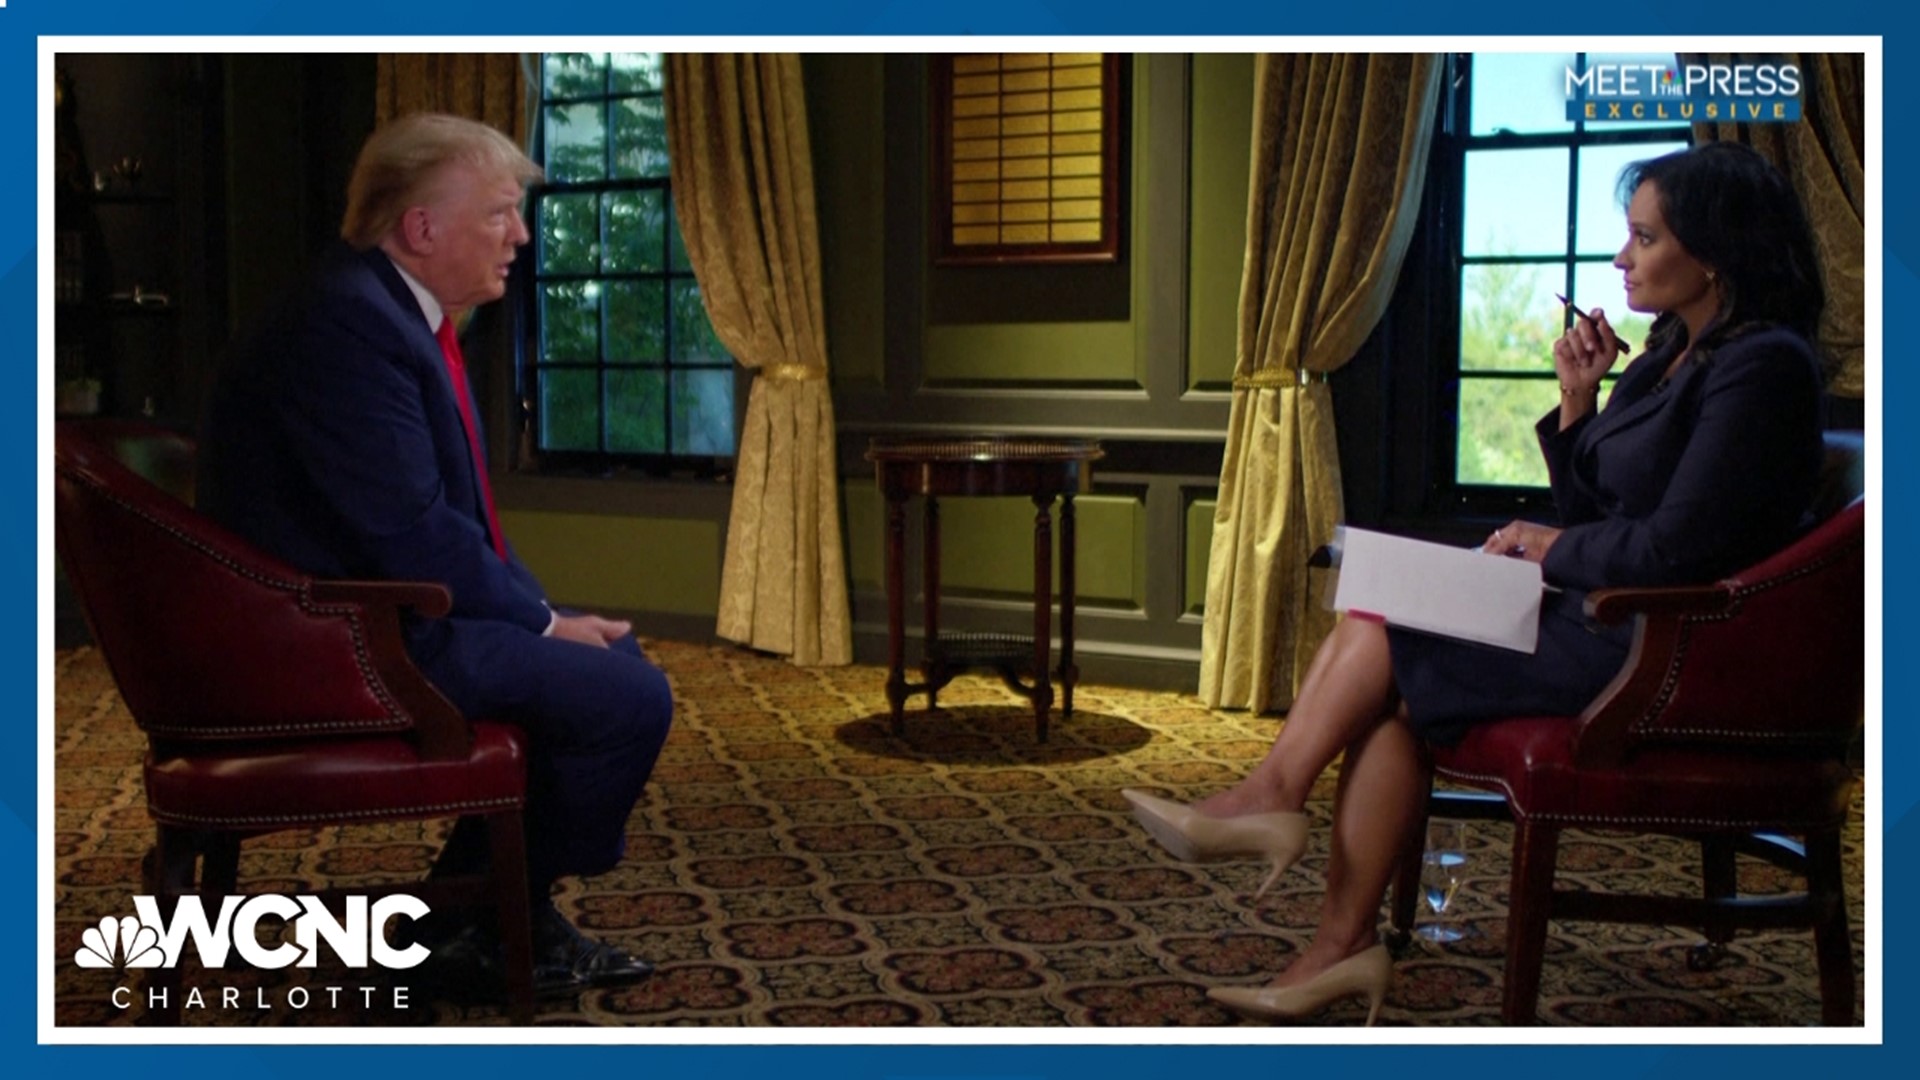 Her first interview is an exclusive sit-down with former President Donald Trump.